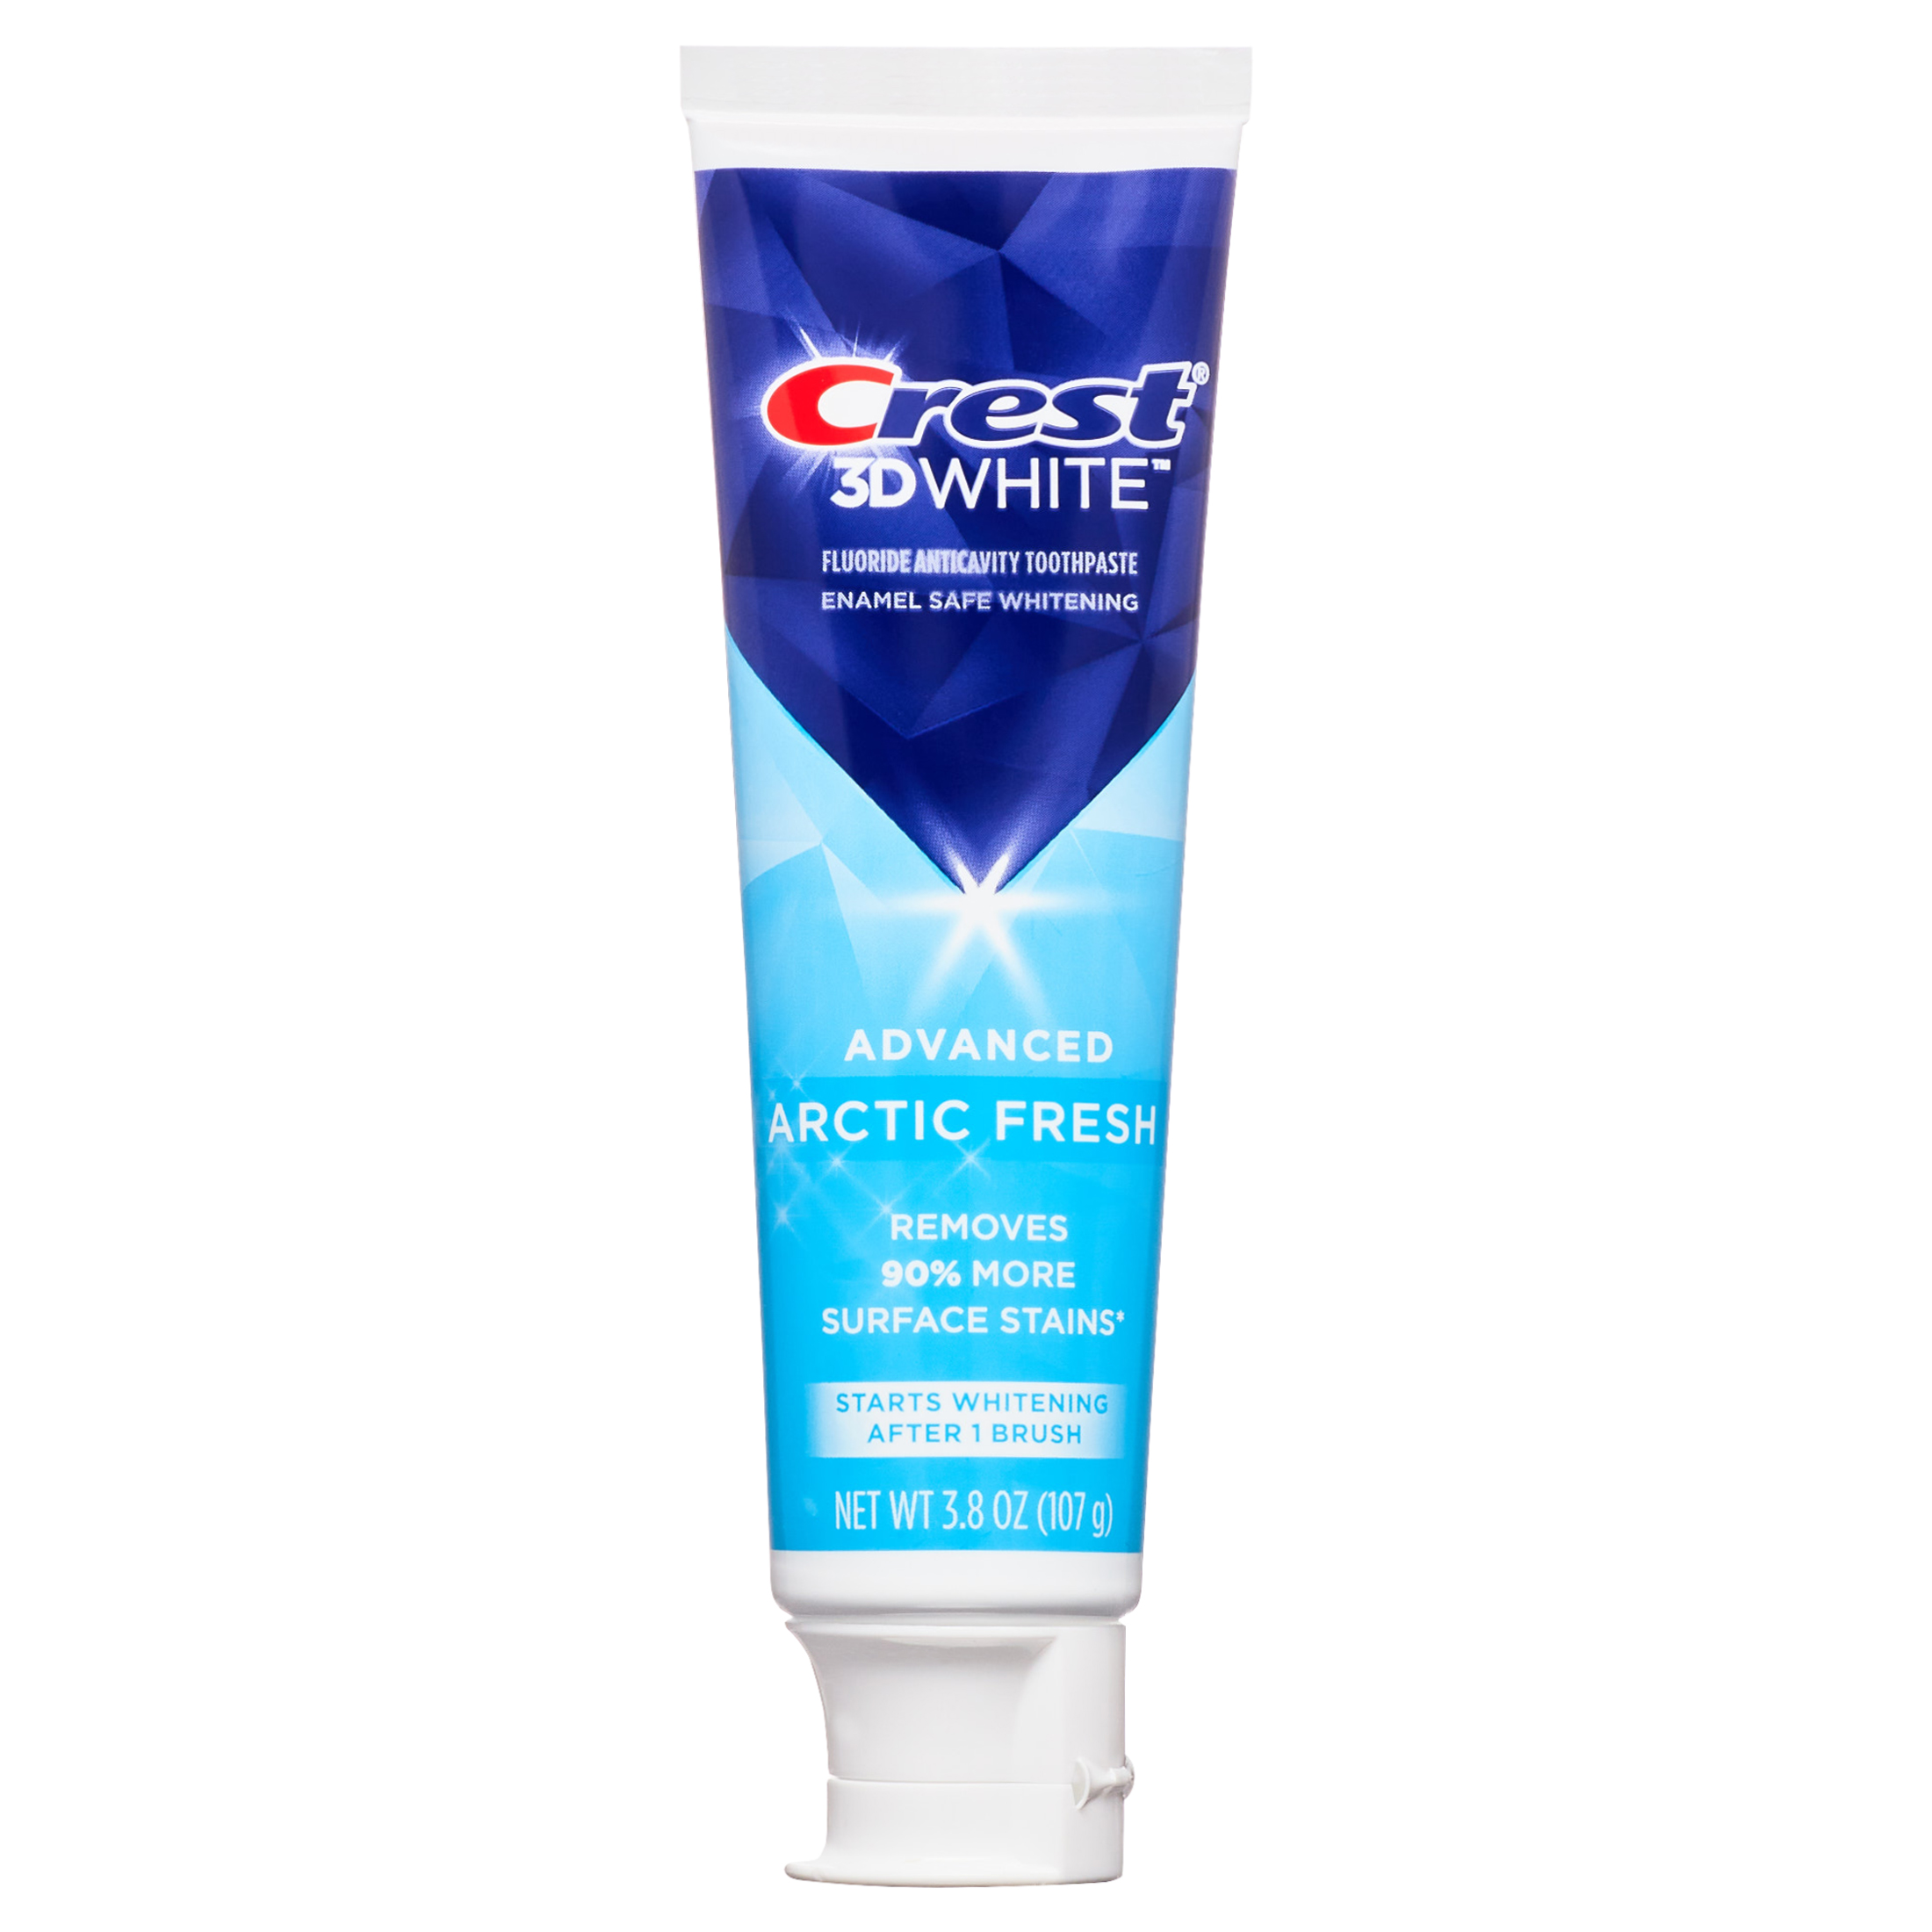 Crest 3D White Arctic Fresh Teeth Whitening Toothpaste, 3.8 oz, 3 Pack - image 2 of 11